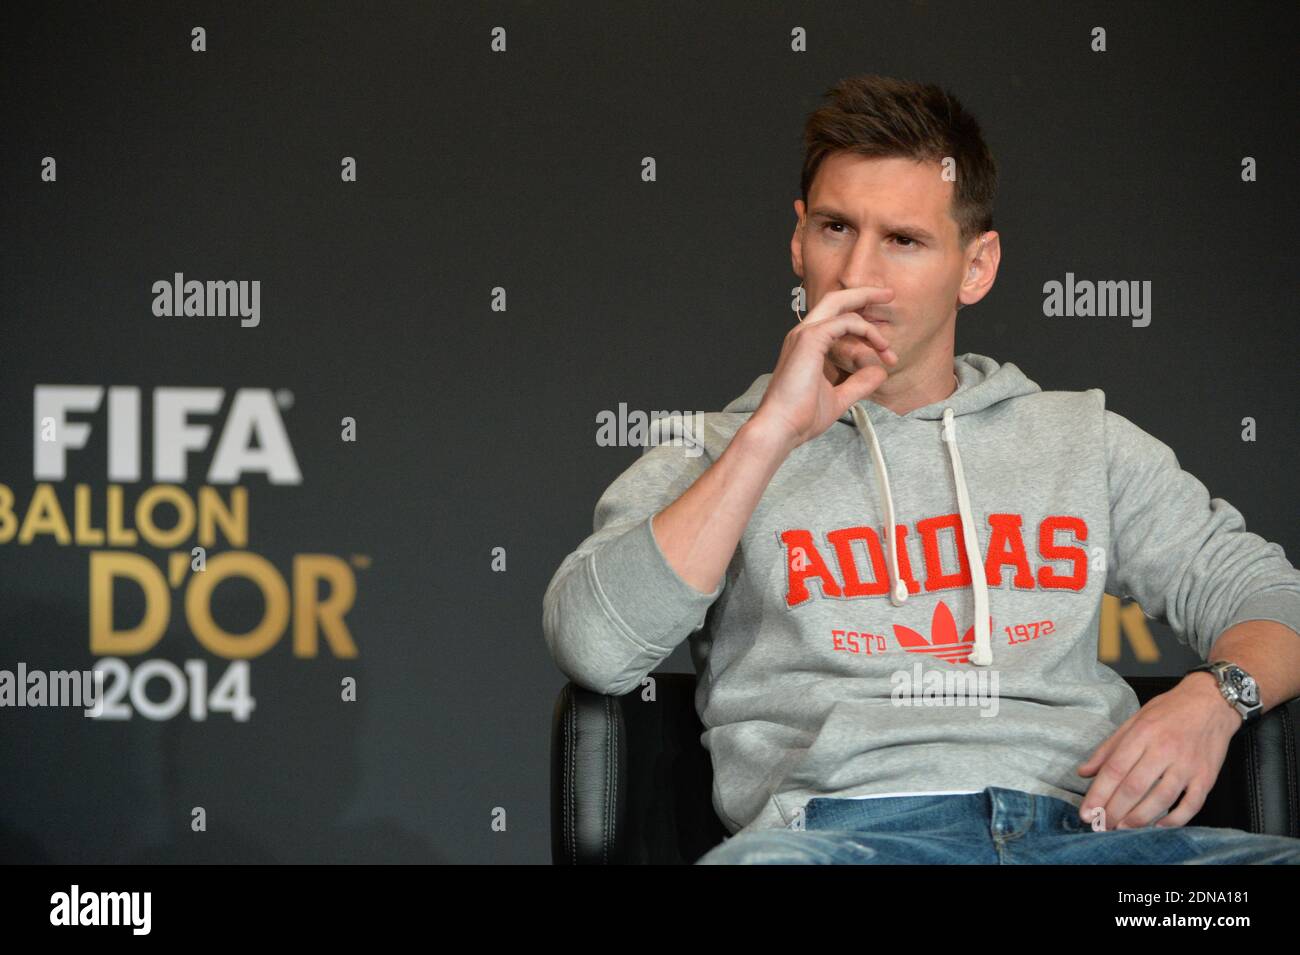 Argentina's Lionel Messi during a press conference before the FIFA Ballon  d'Or 2014 Award Gala at the Kongresshalle in Zurich, Switzerland on January  12, 2015. Photo by Christian Liewig/ABACAPRESS.COM Stock Photo -